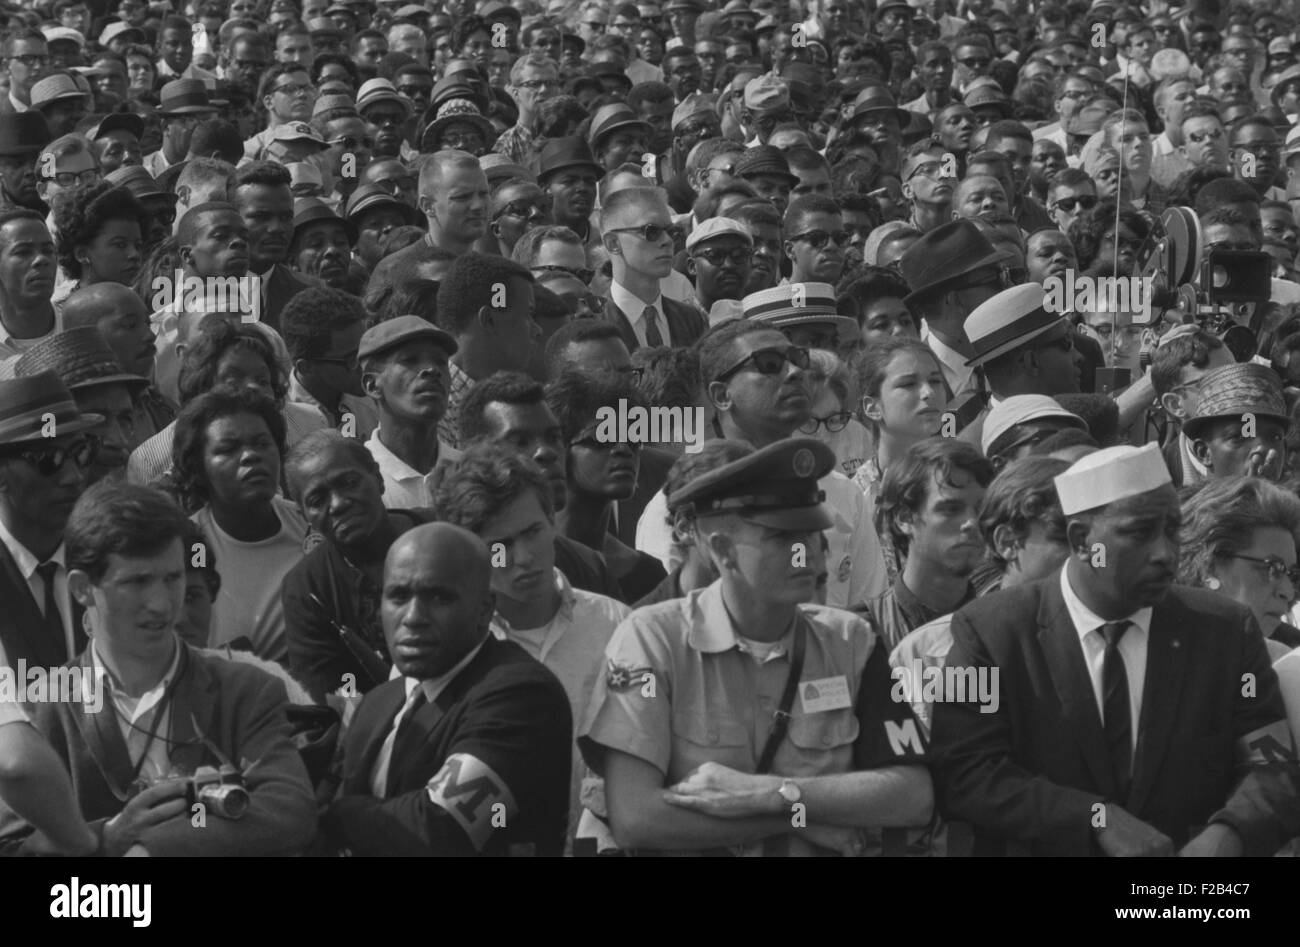 Faces in the crowd during the March on Washington, Aug. 28, 1963. Observers estimated that 75–80% of the marchers were black. - Stock Photo